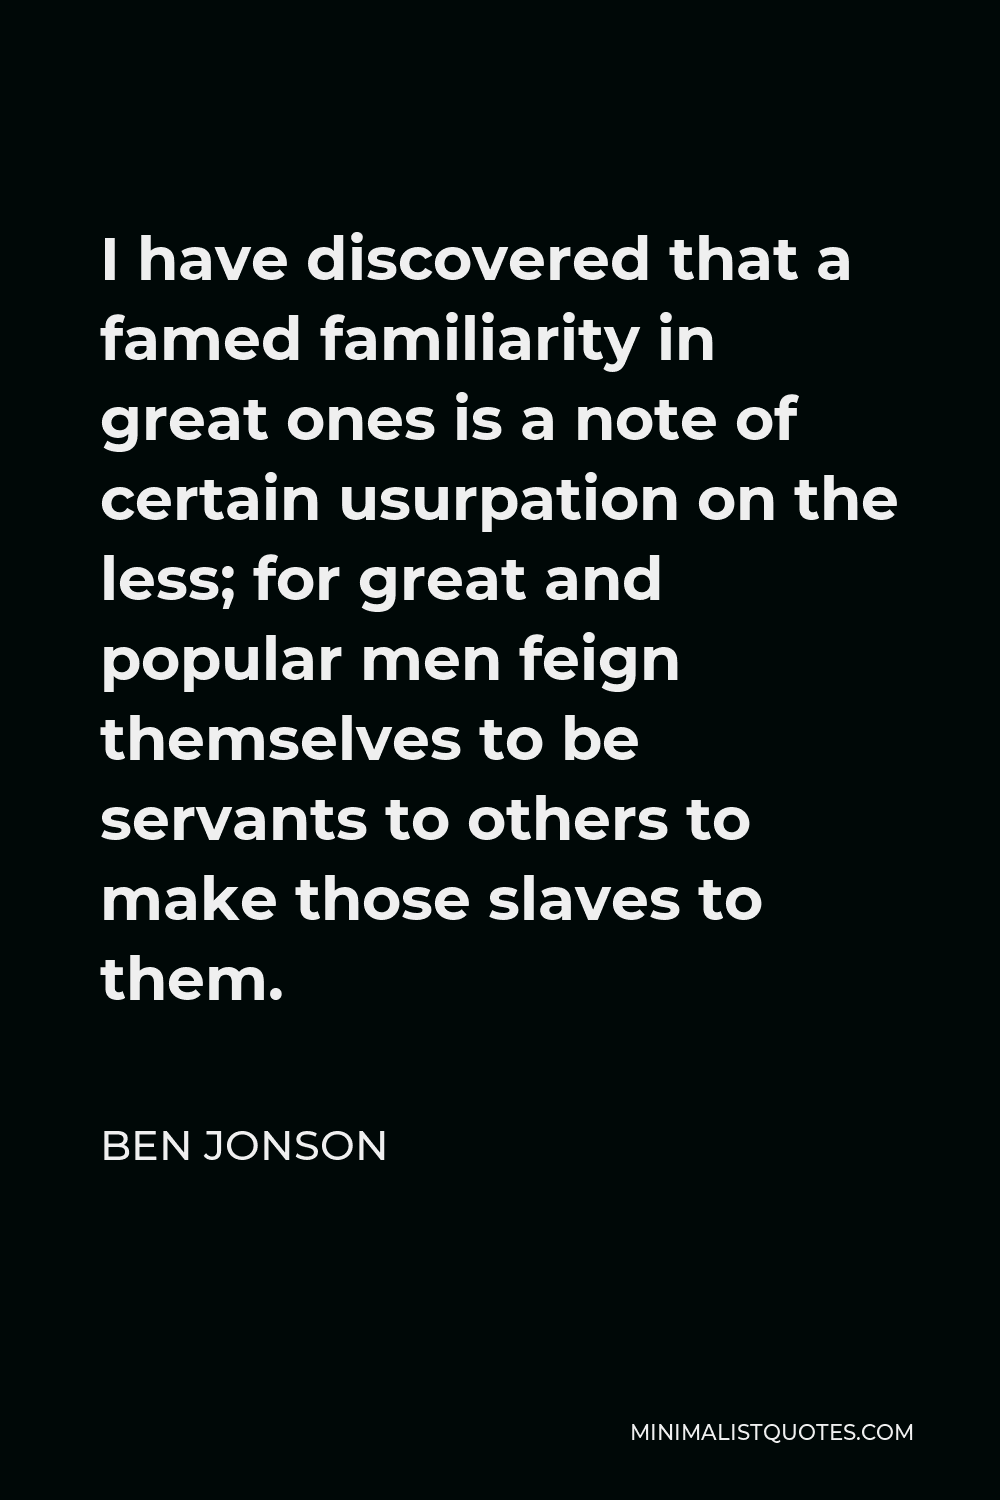 Ben Jonson Quote - I have discovered that a famed familiarity in great ones is a note of certain usurpation on the less; for great and popular men feign themselves to be servants to others to make those slaves to them.